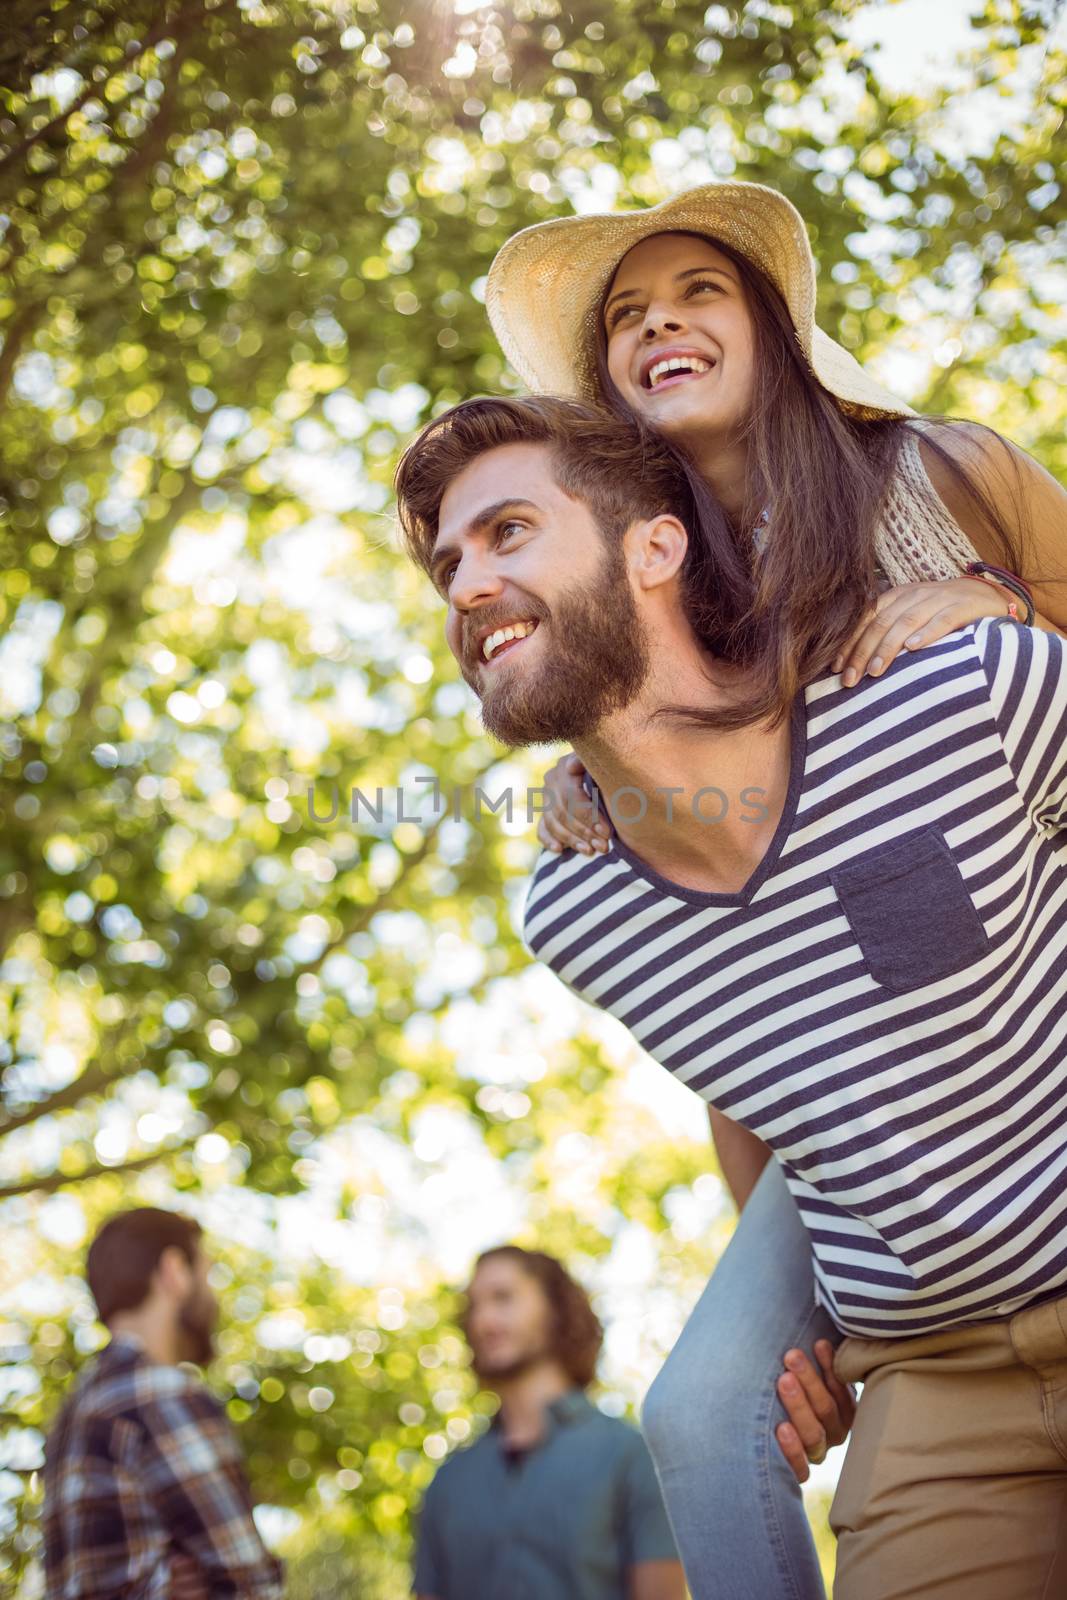 Hipster couple having fun together on a summers day